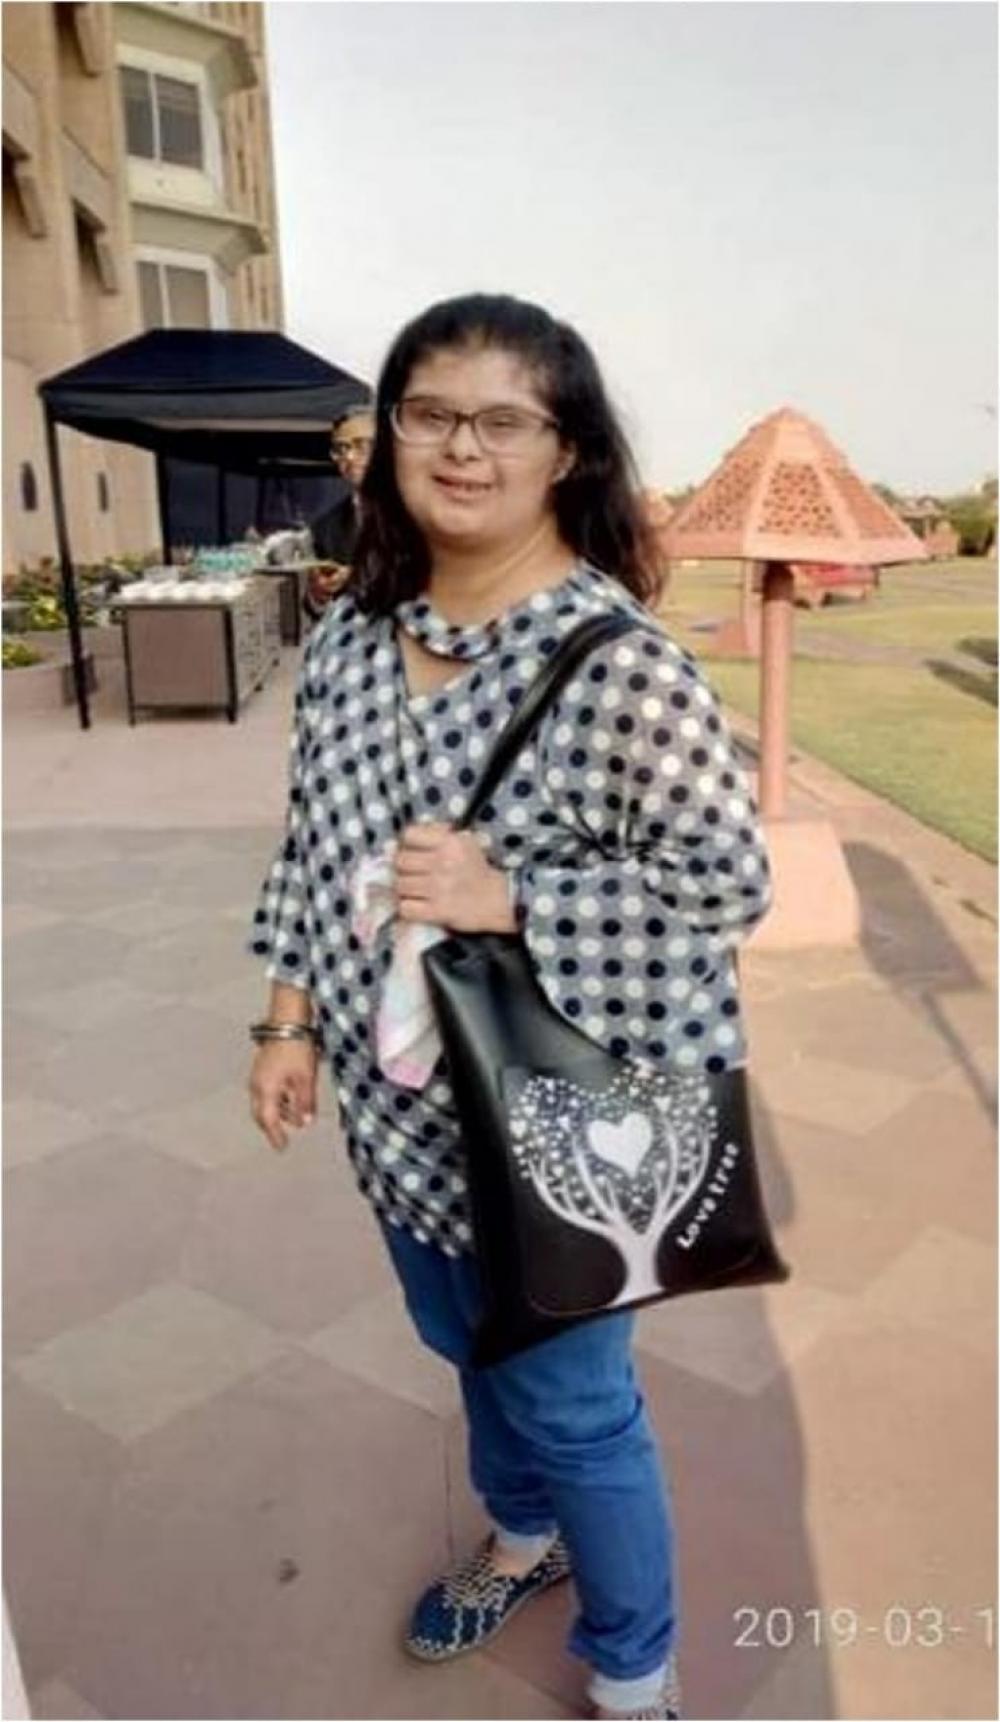 The Weekend Leader - 'Role Model' award for intellectually disabled Devanshi Joshi